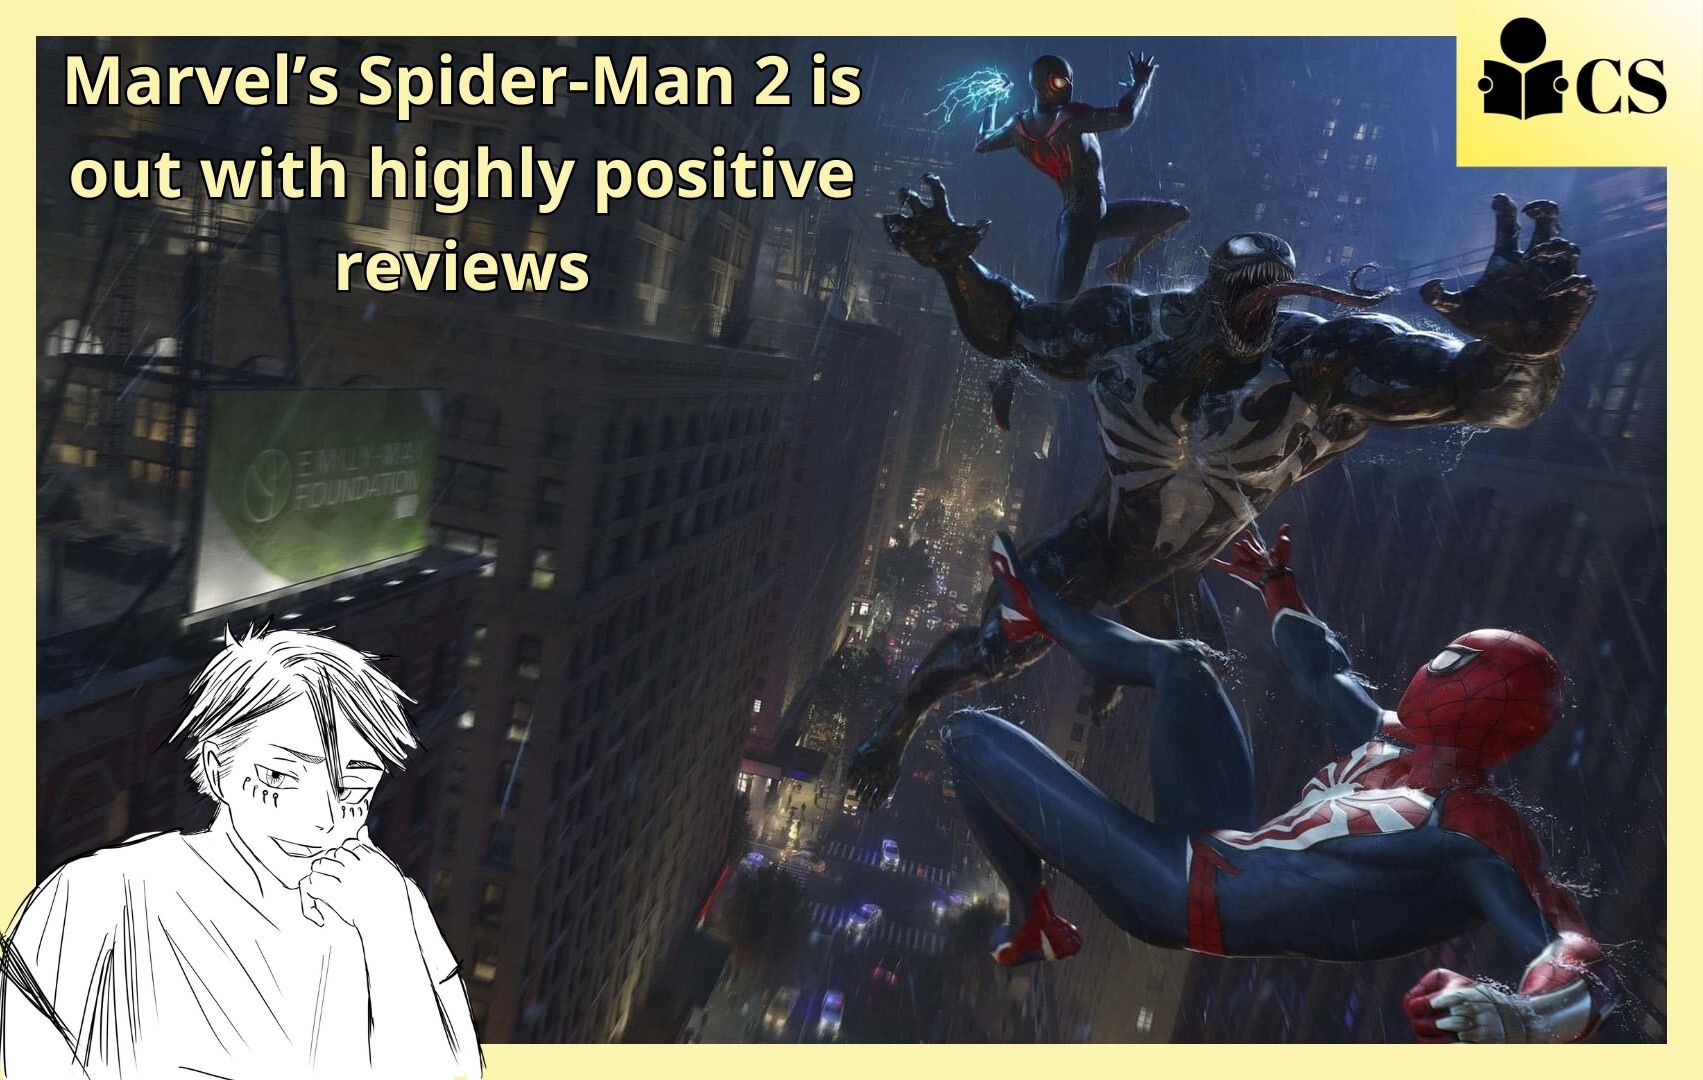 Marvel’s Spider-Man 2 is out with highly positive reviews